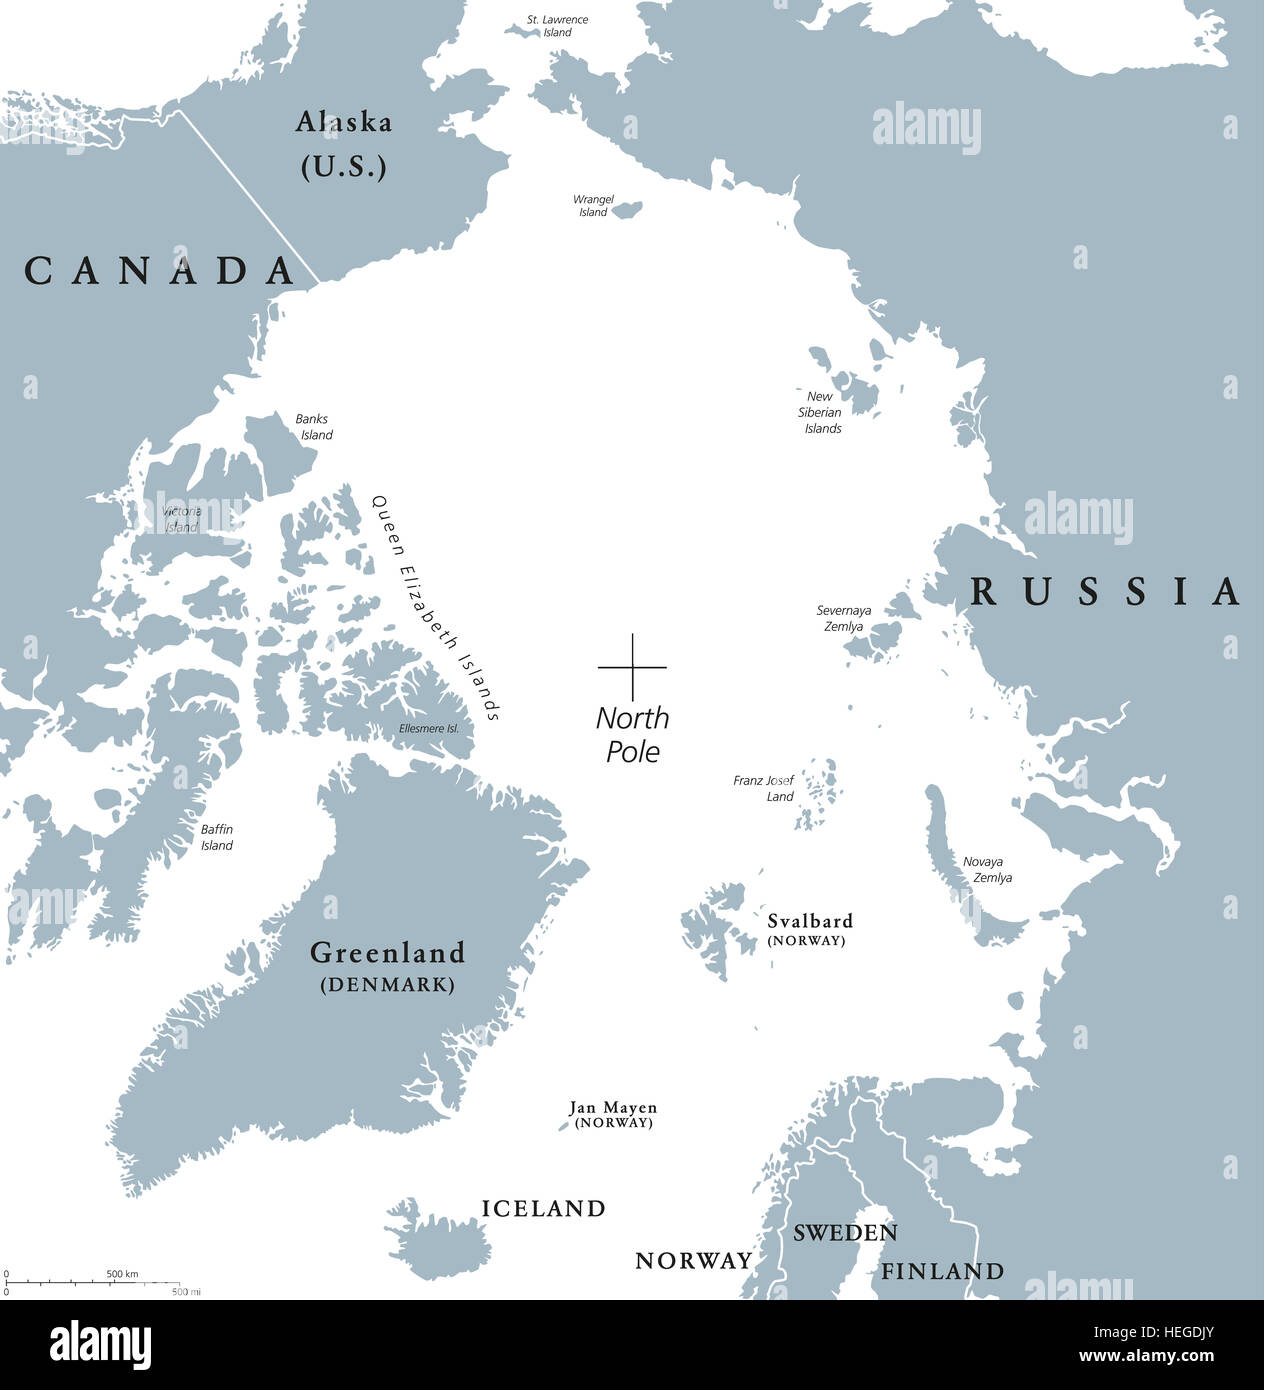 Arctic region political map. Polar region around the North Pole at the northernmost part of Earth. The Arctic Ocean without ice. Stock Photo